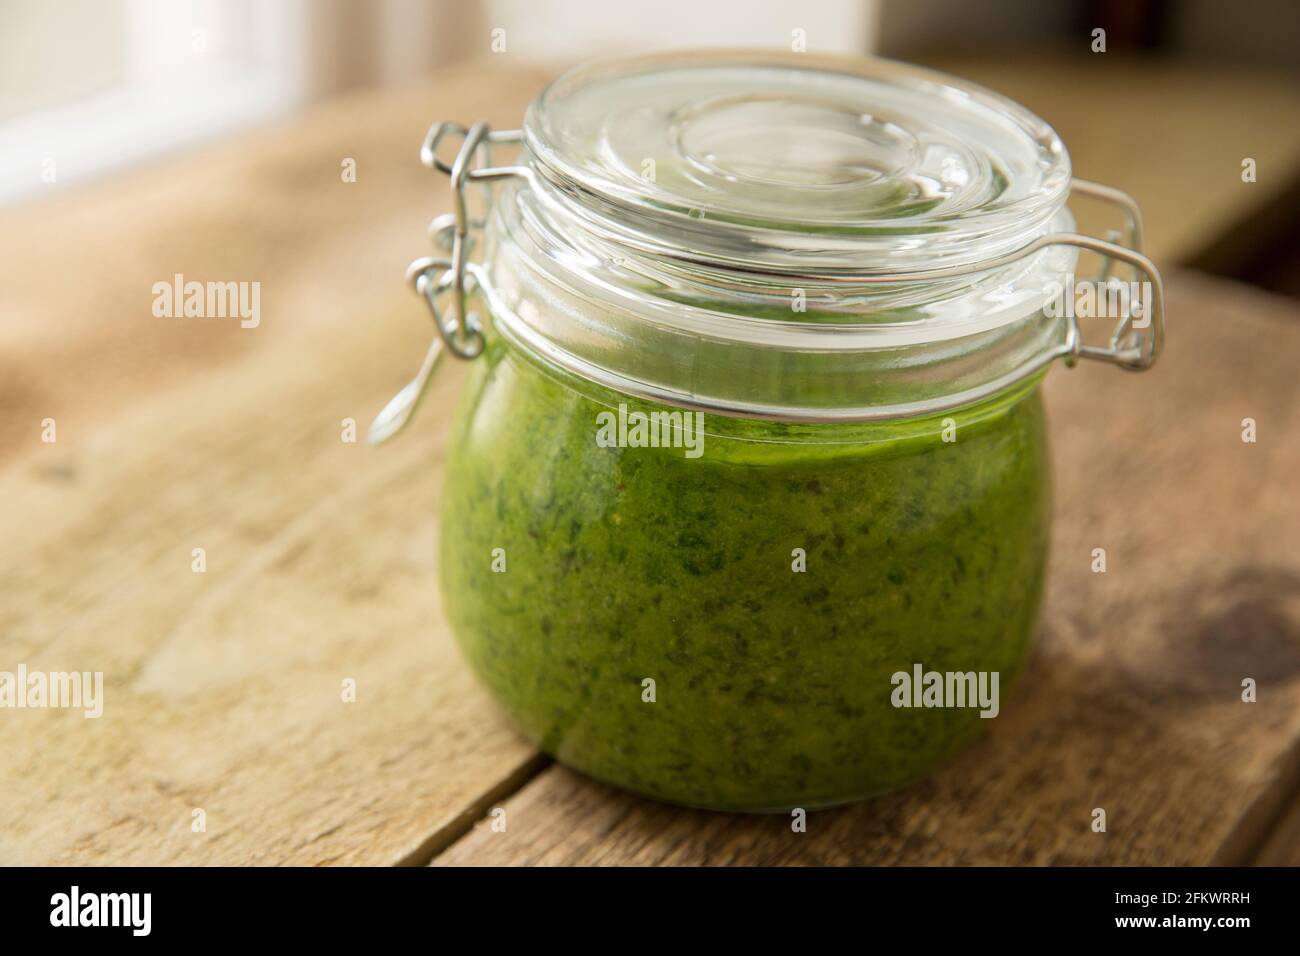 Pesto made from wild garlic, Allium ursinum, that includes rapeseed oil, lemon juice and pine nuts. It is seen here in a glass jar after being mixed i Stock Photo